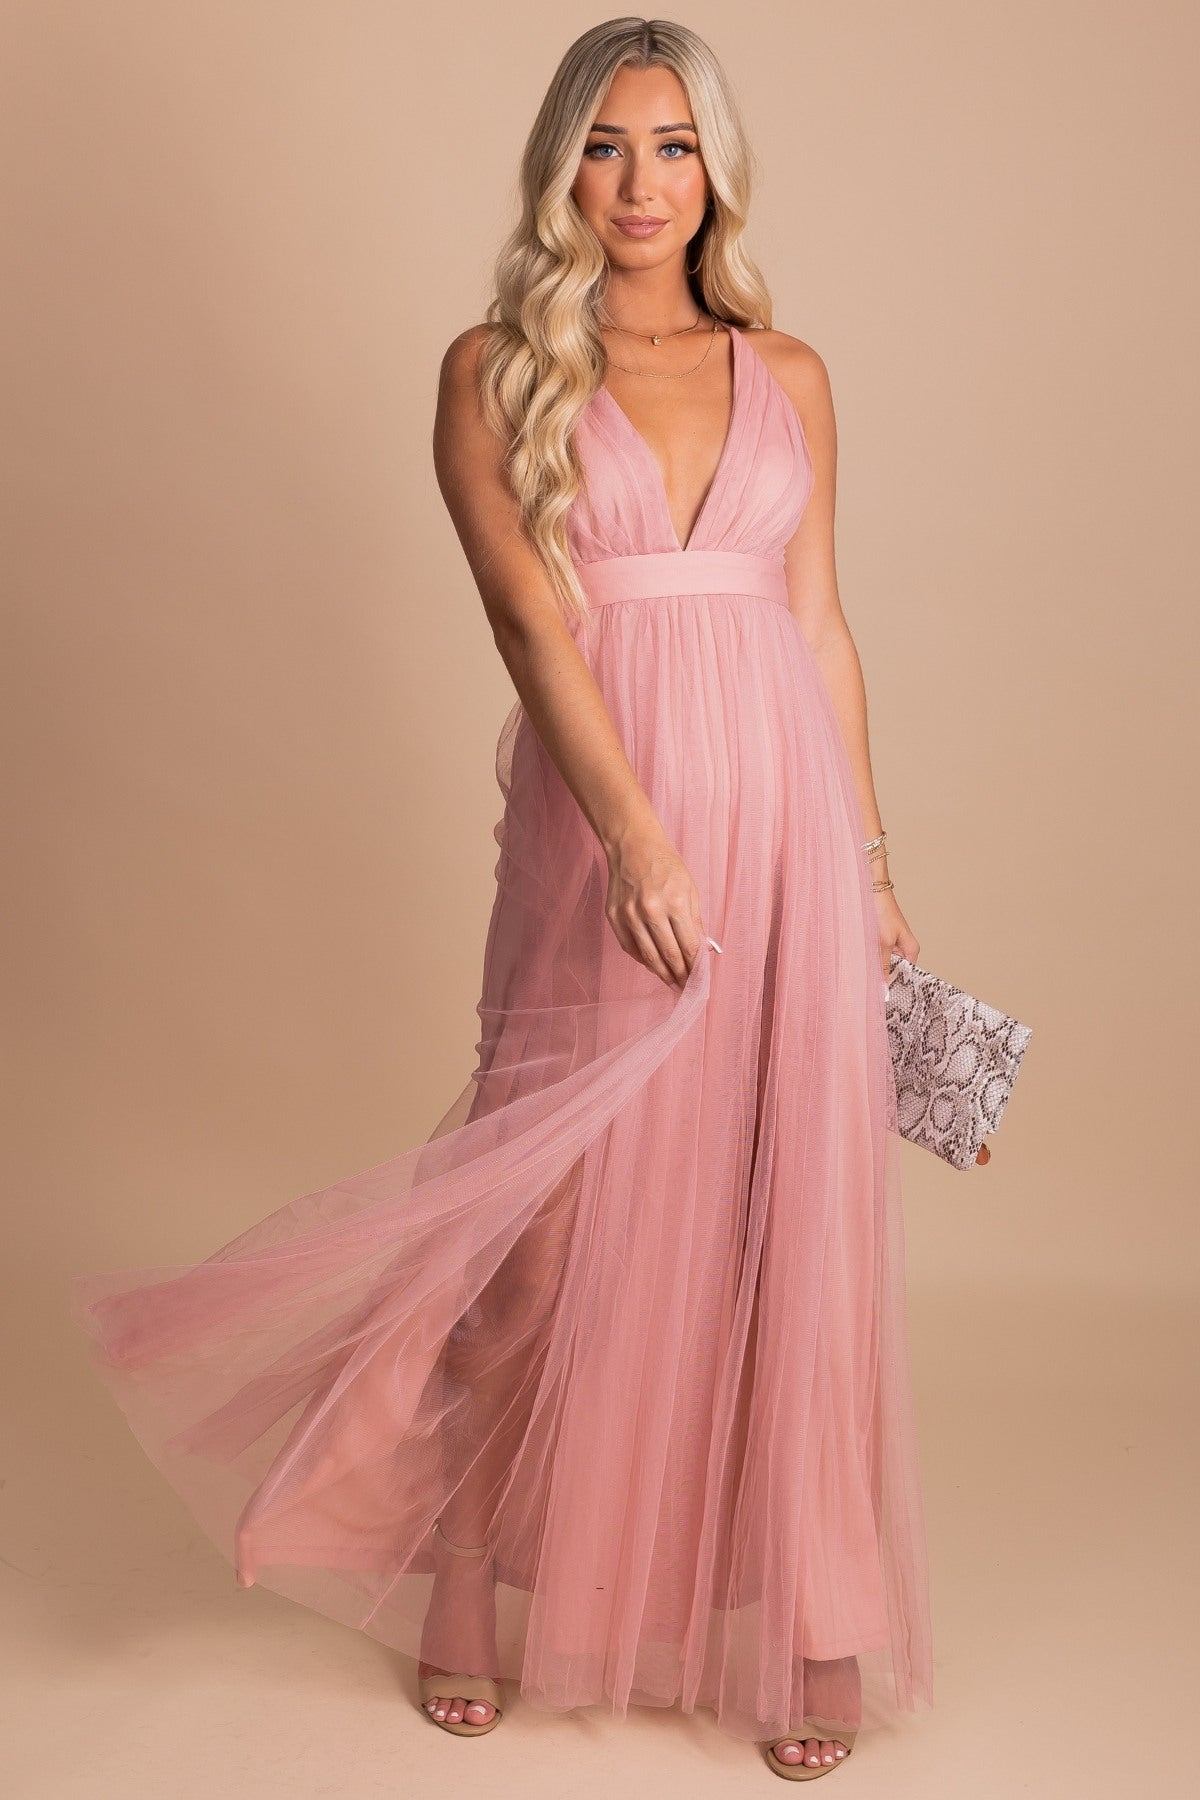 Dusty Mauve Pink Formal Dress with Plunging Neckline